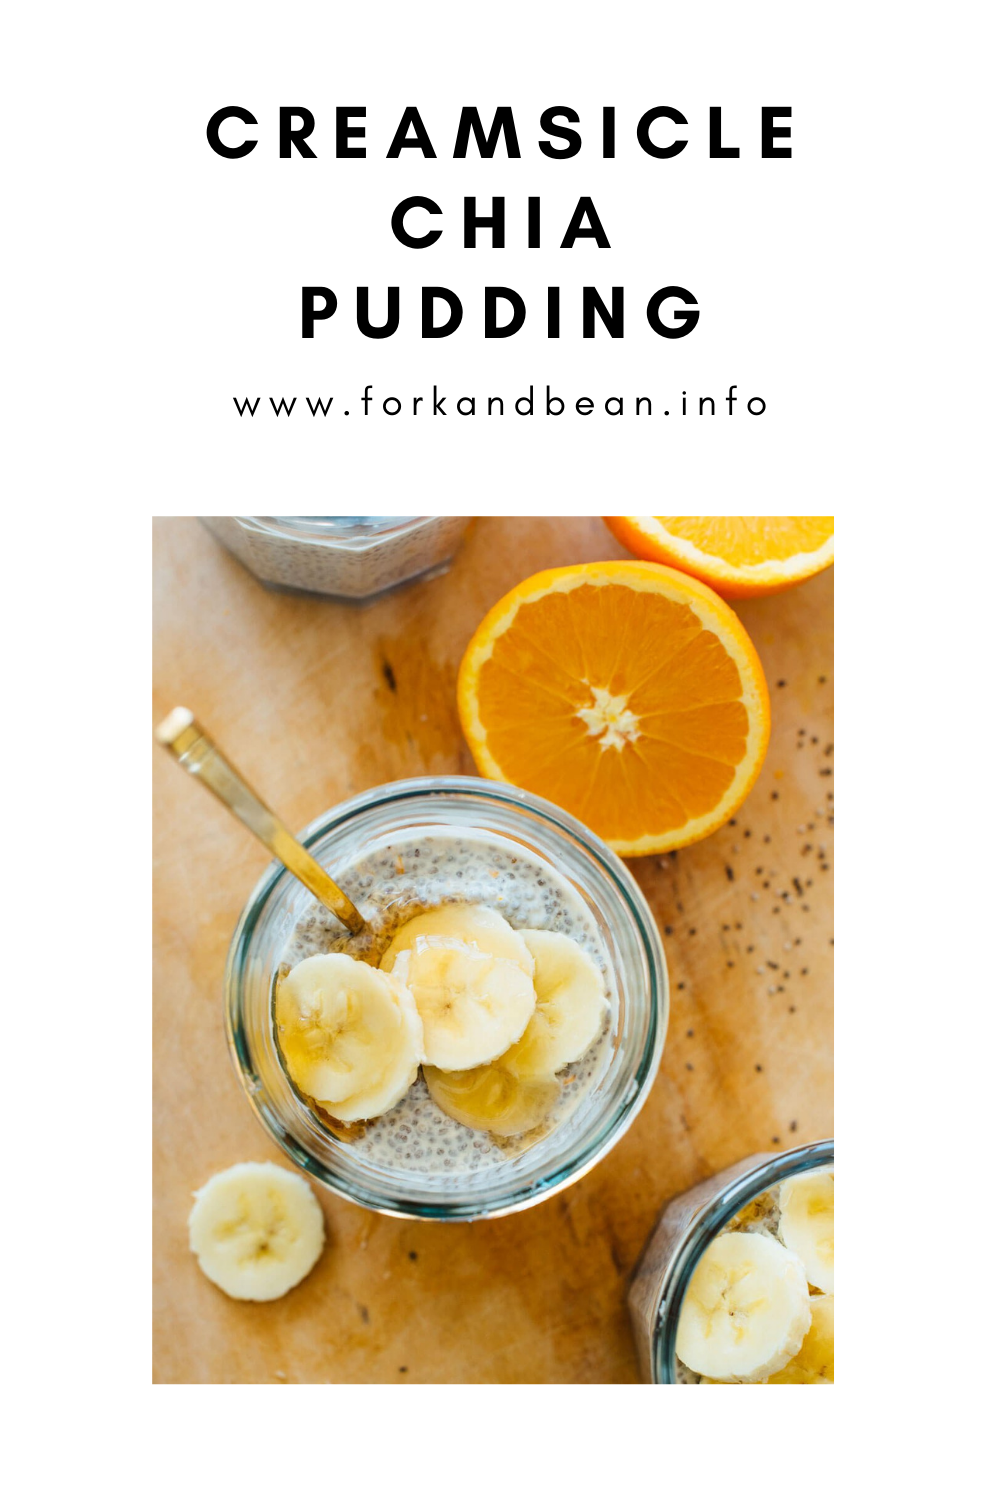 My Favorite Chia Seed Pudding